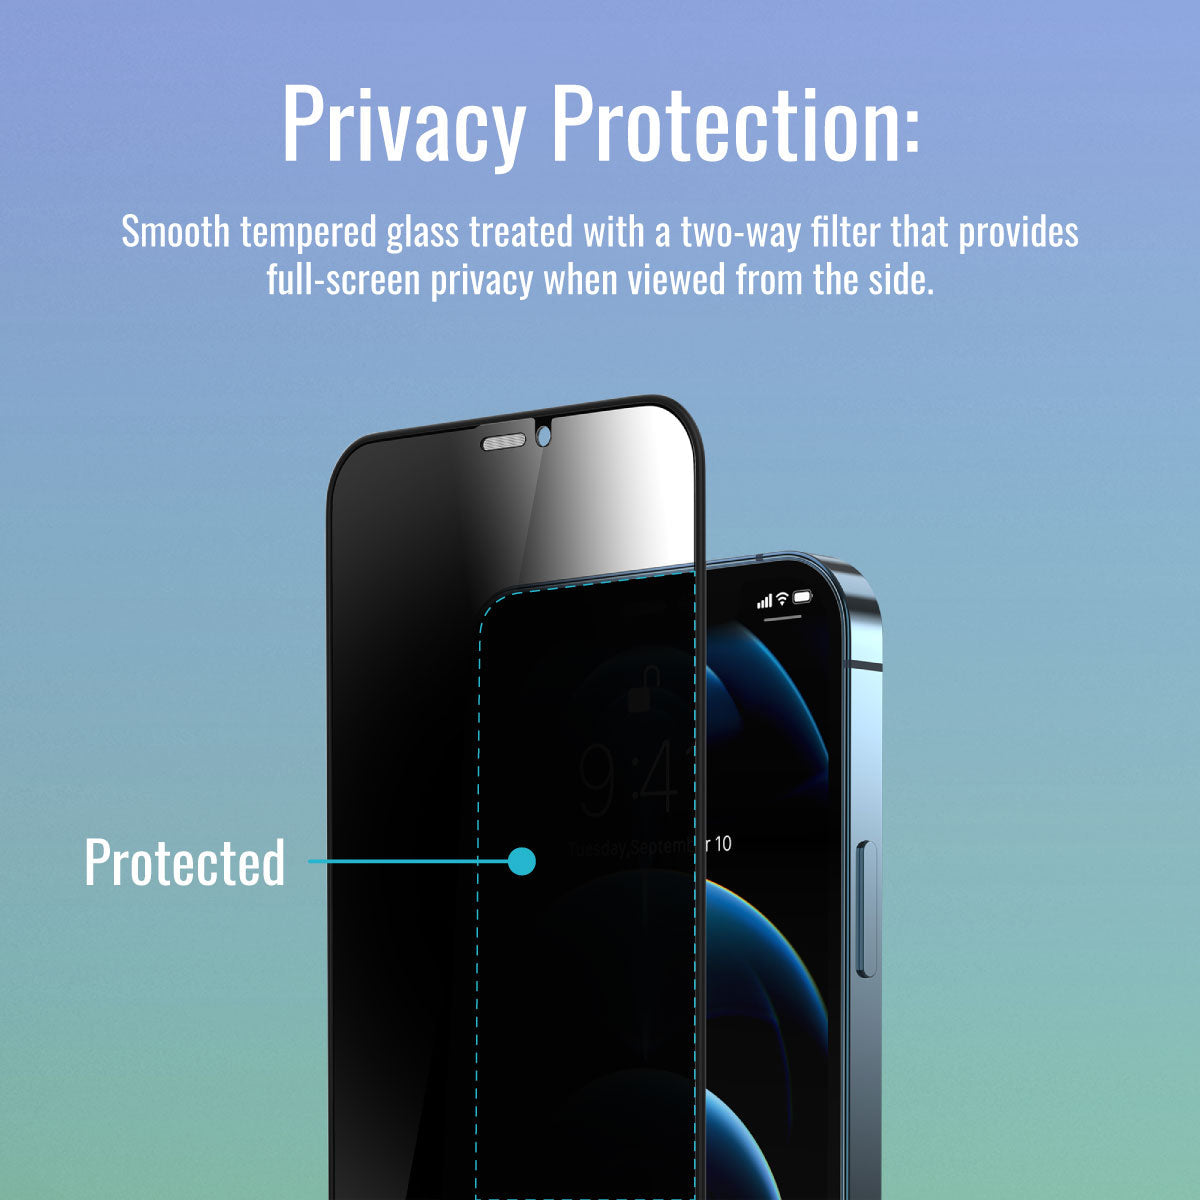 Promate Privacy Glass Screen Protector for iPhone 11 Pro Max, Clear Anti-Spy 3D Tempered Glass Screen Guard with Built-In Silicone Bumper, 9H Hardness and Shatter Protection, Aegis-i11Max